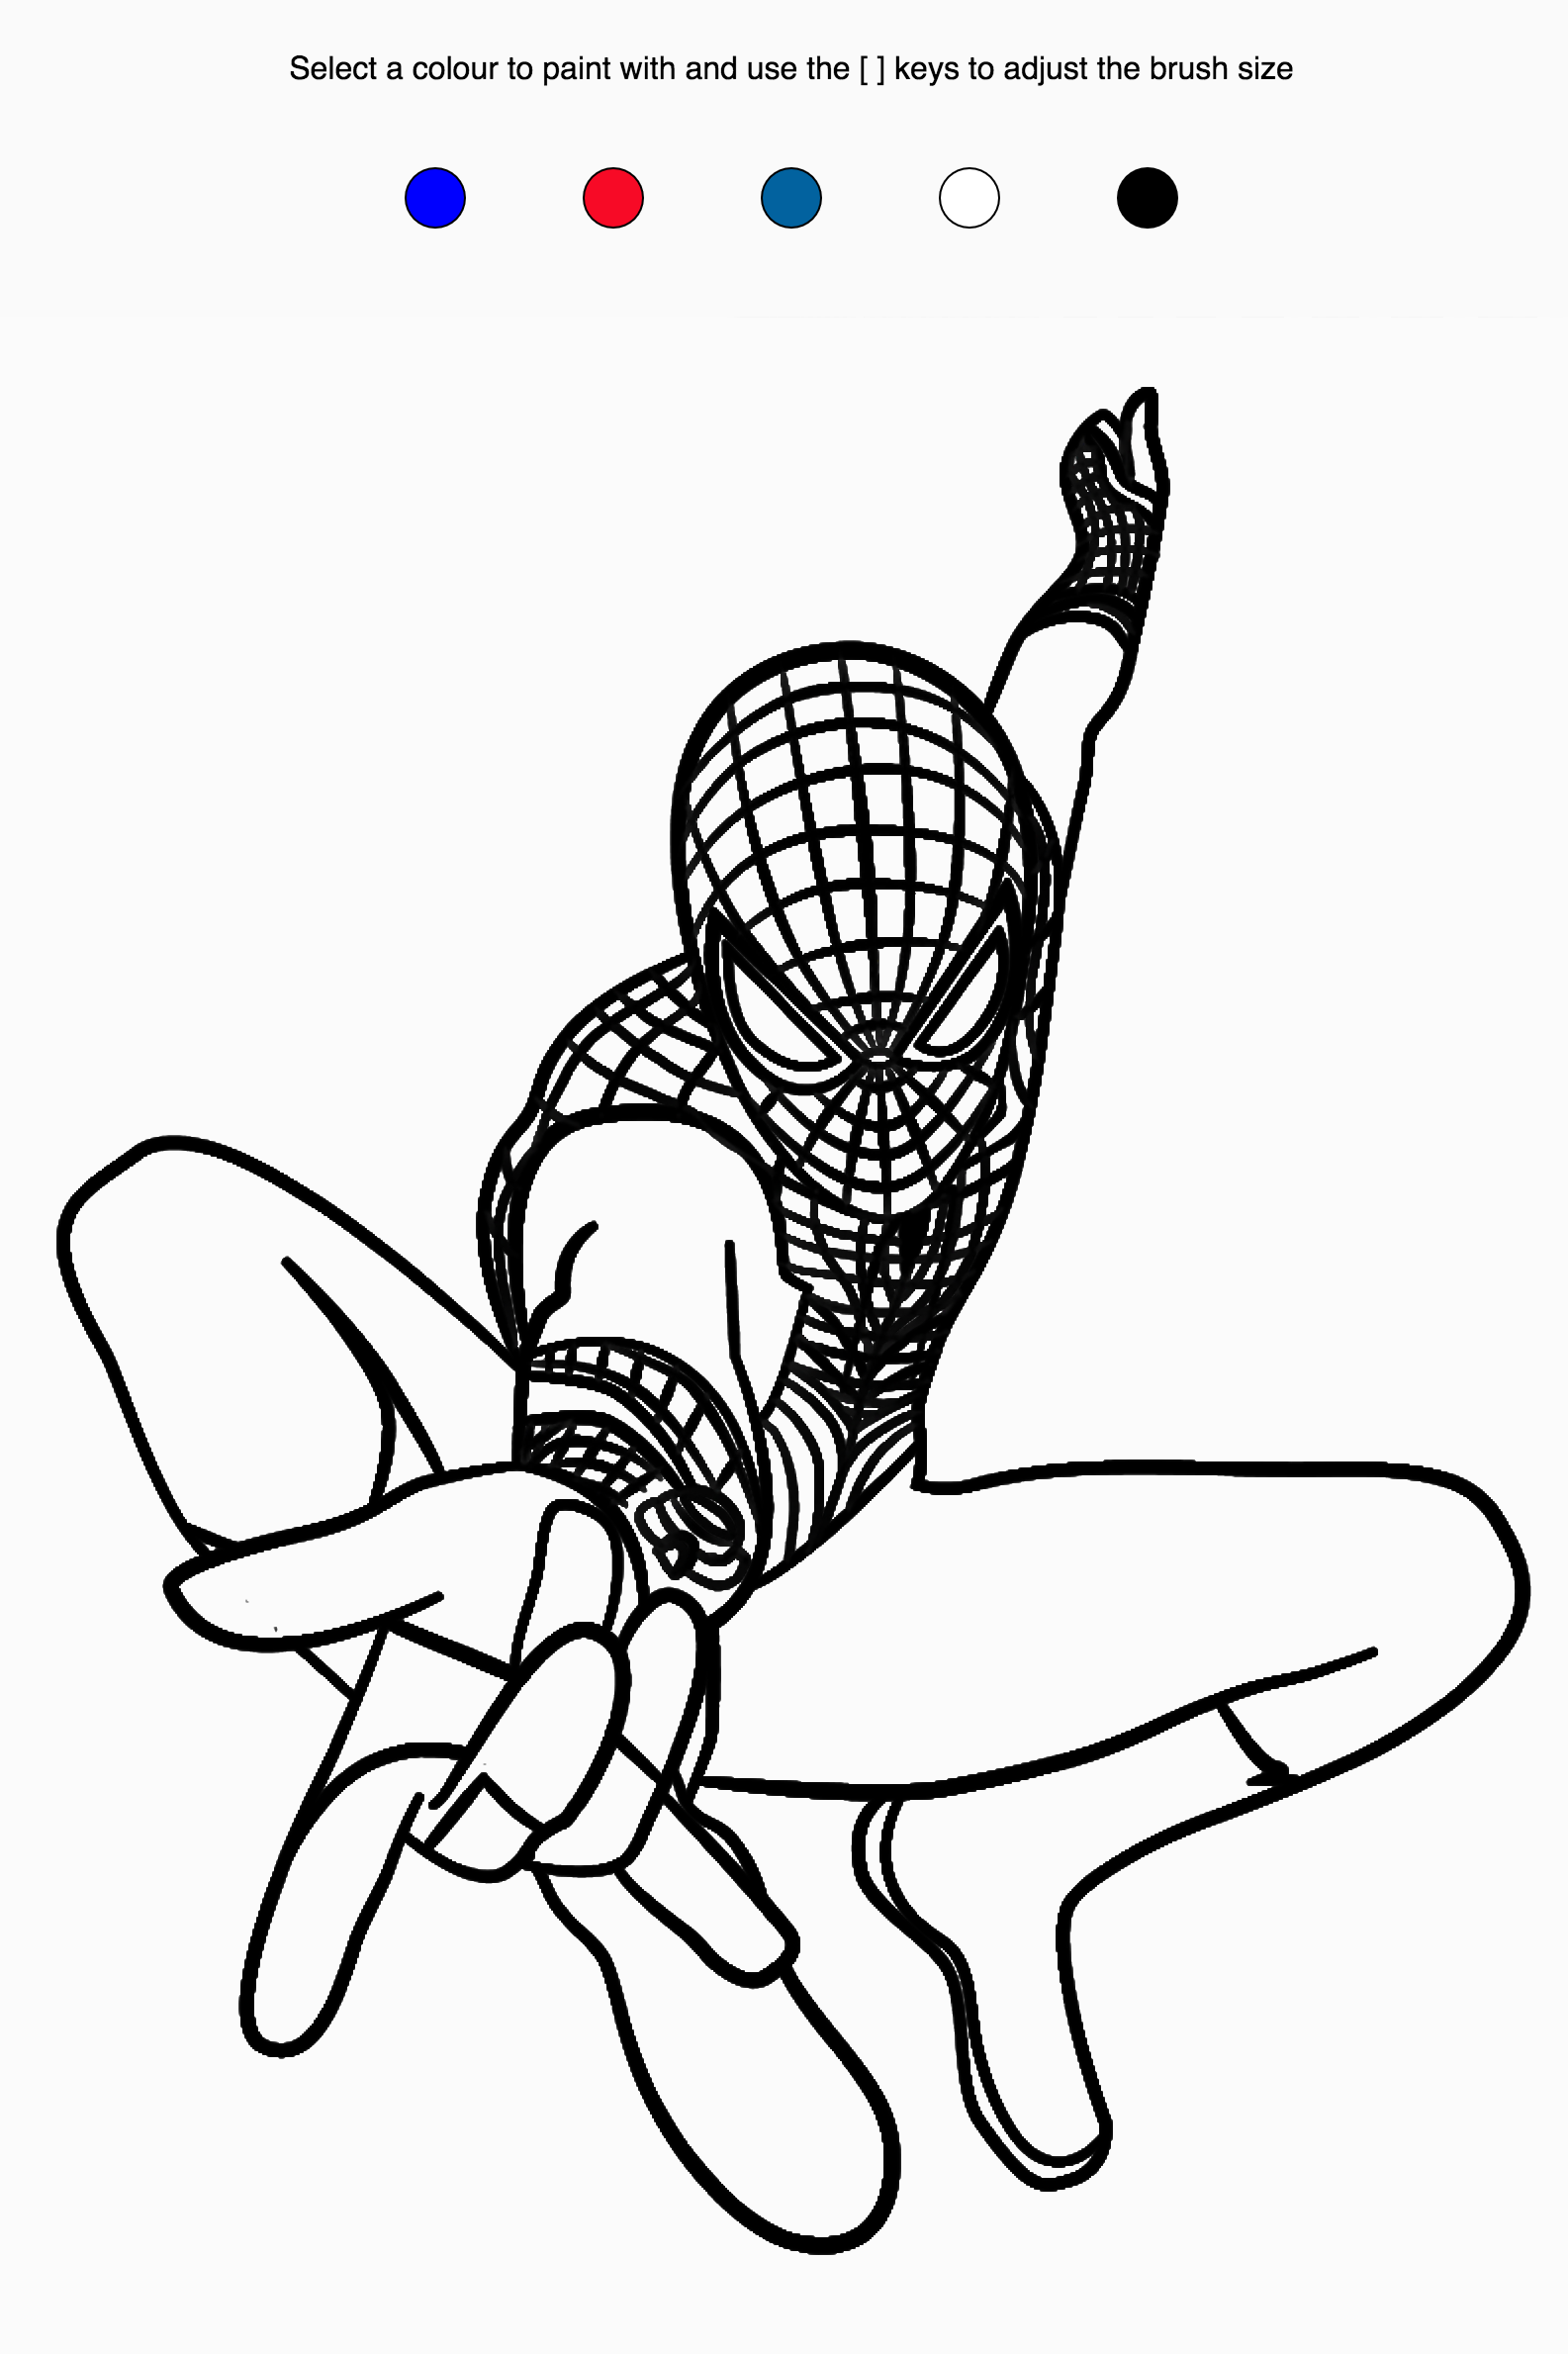 Spider-Man Uncoloured.png